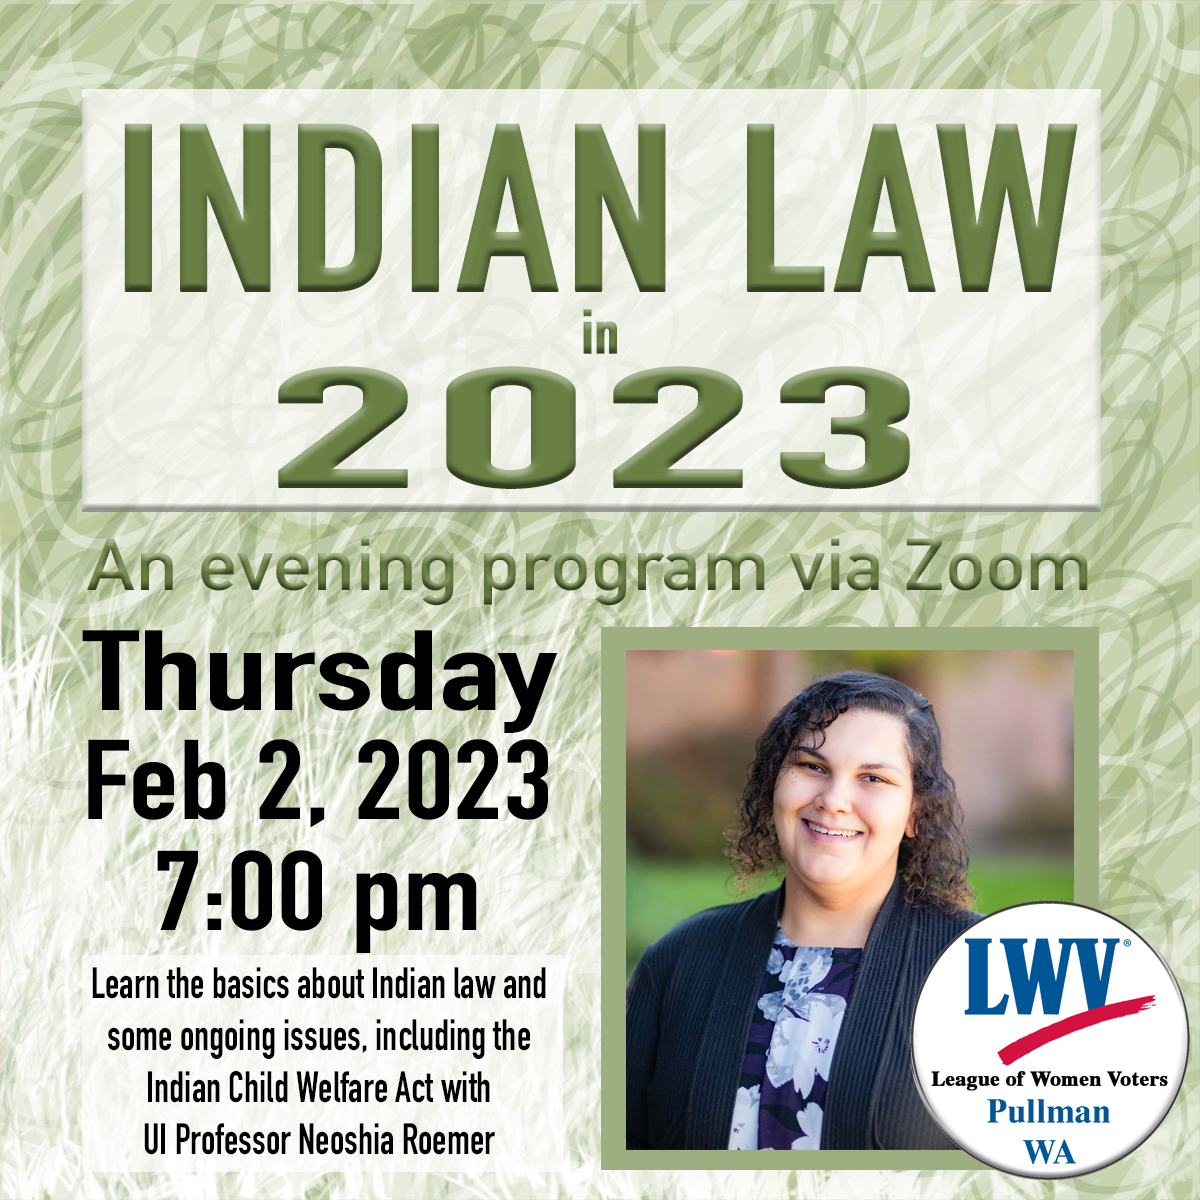 A Picture of Professor Neoshia Roemer of University of Idaho who will present a talk on Indian Law in 2023 on Feb 2, 2023 at 7pm via zoom